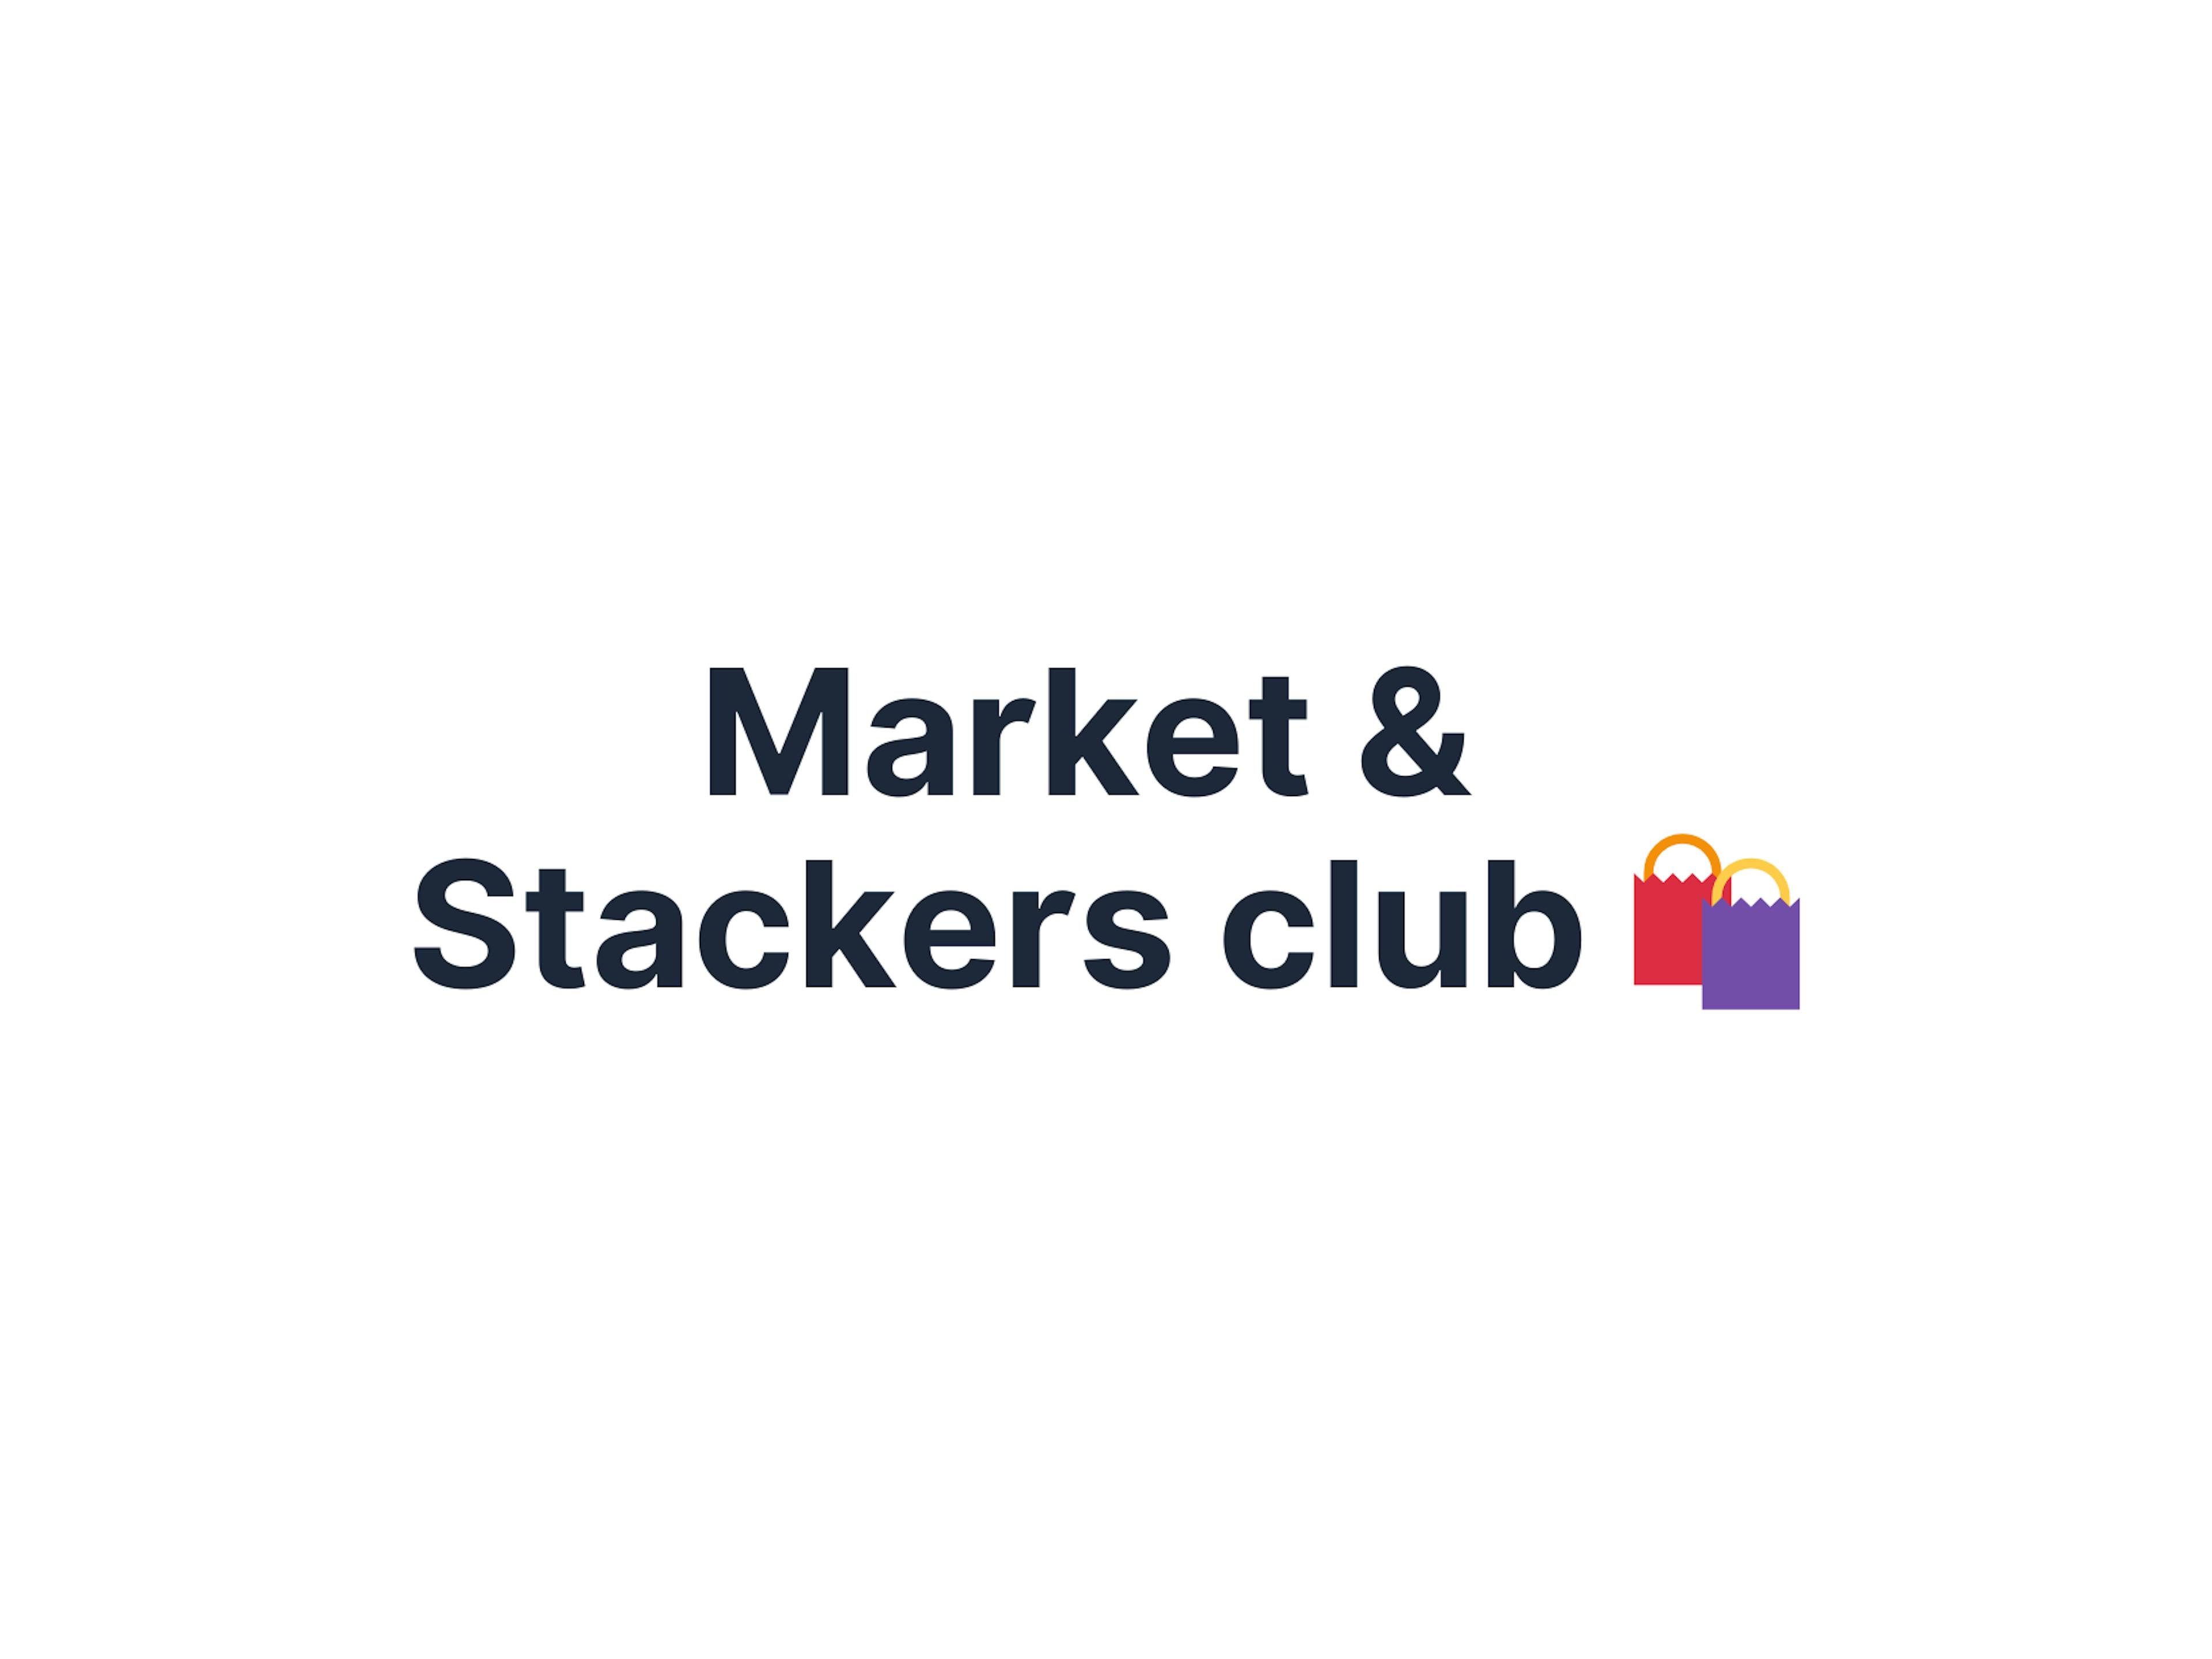 Market & Stackers club